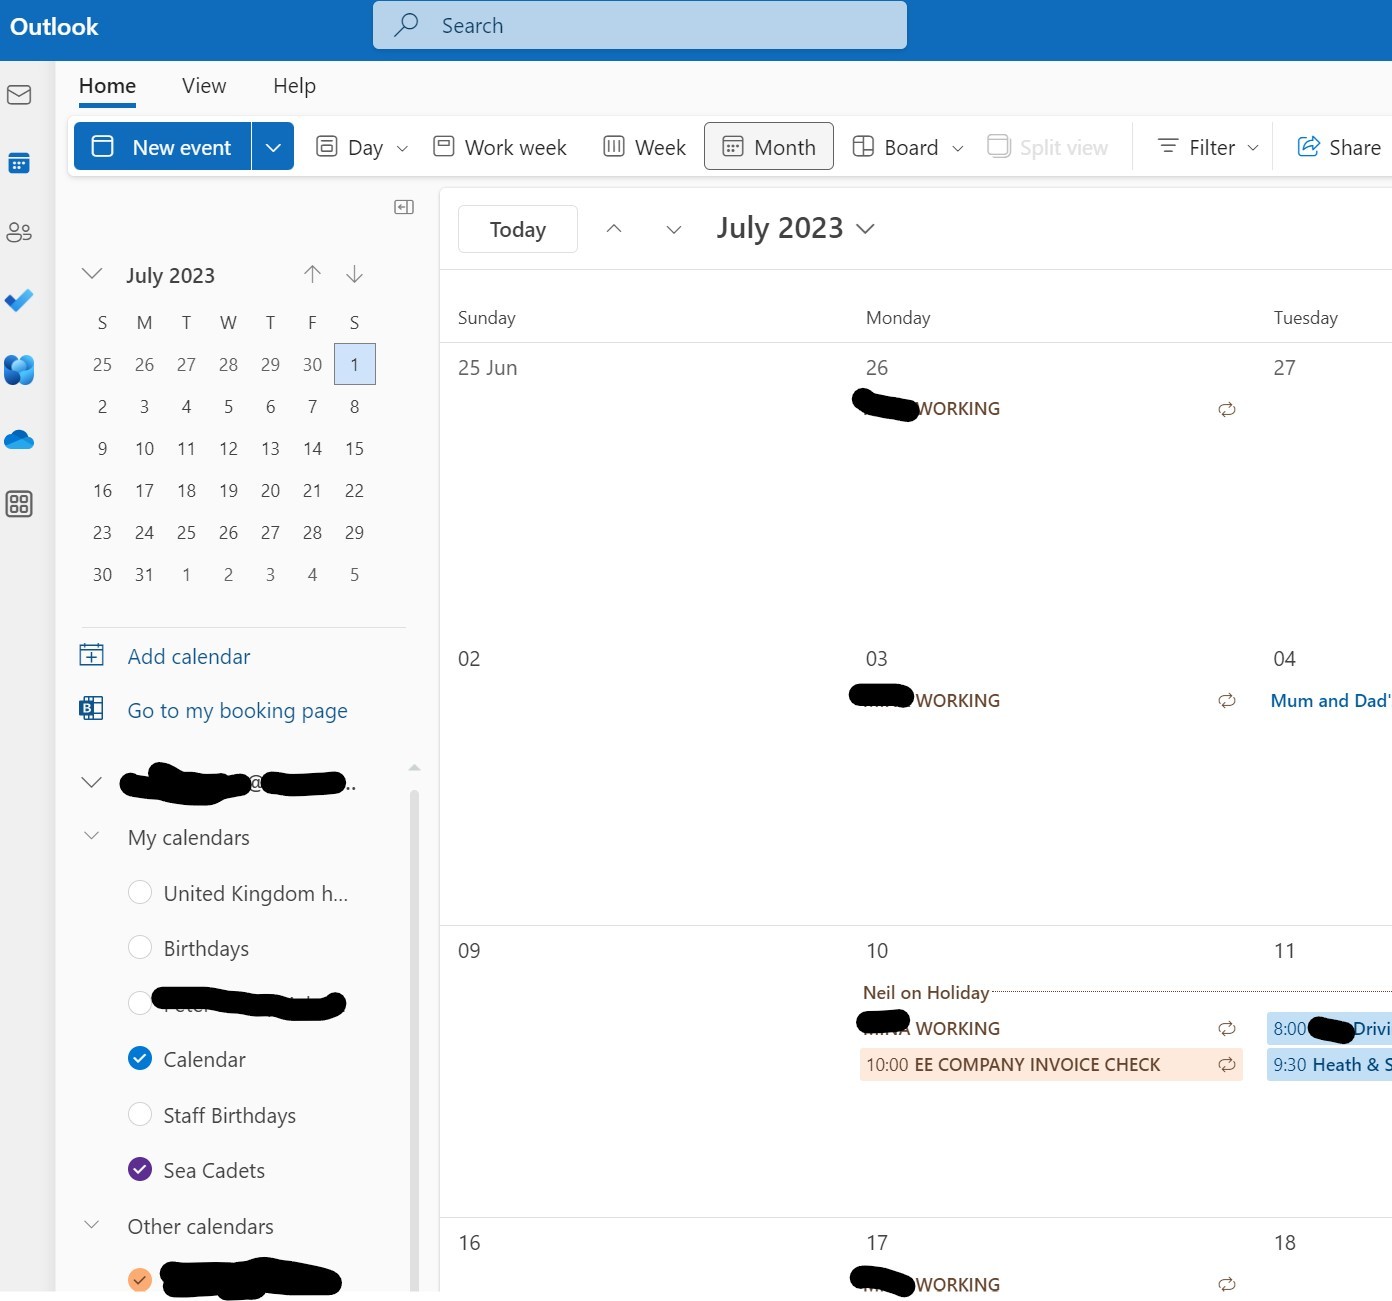 Getting started with the new Outlook for Windows - Microsoft Support